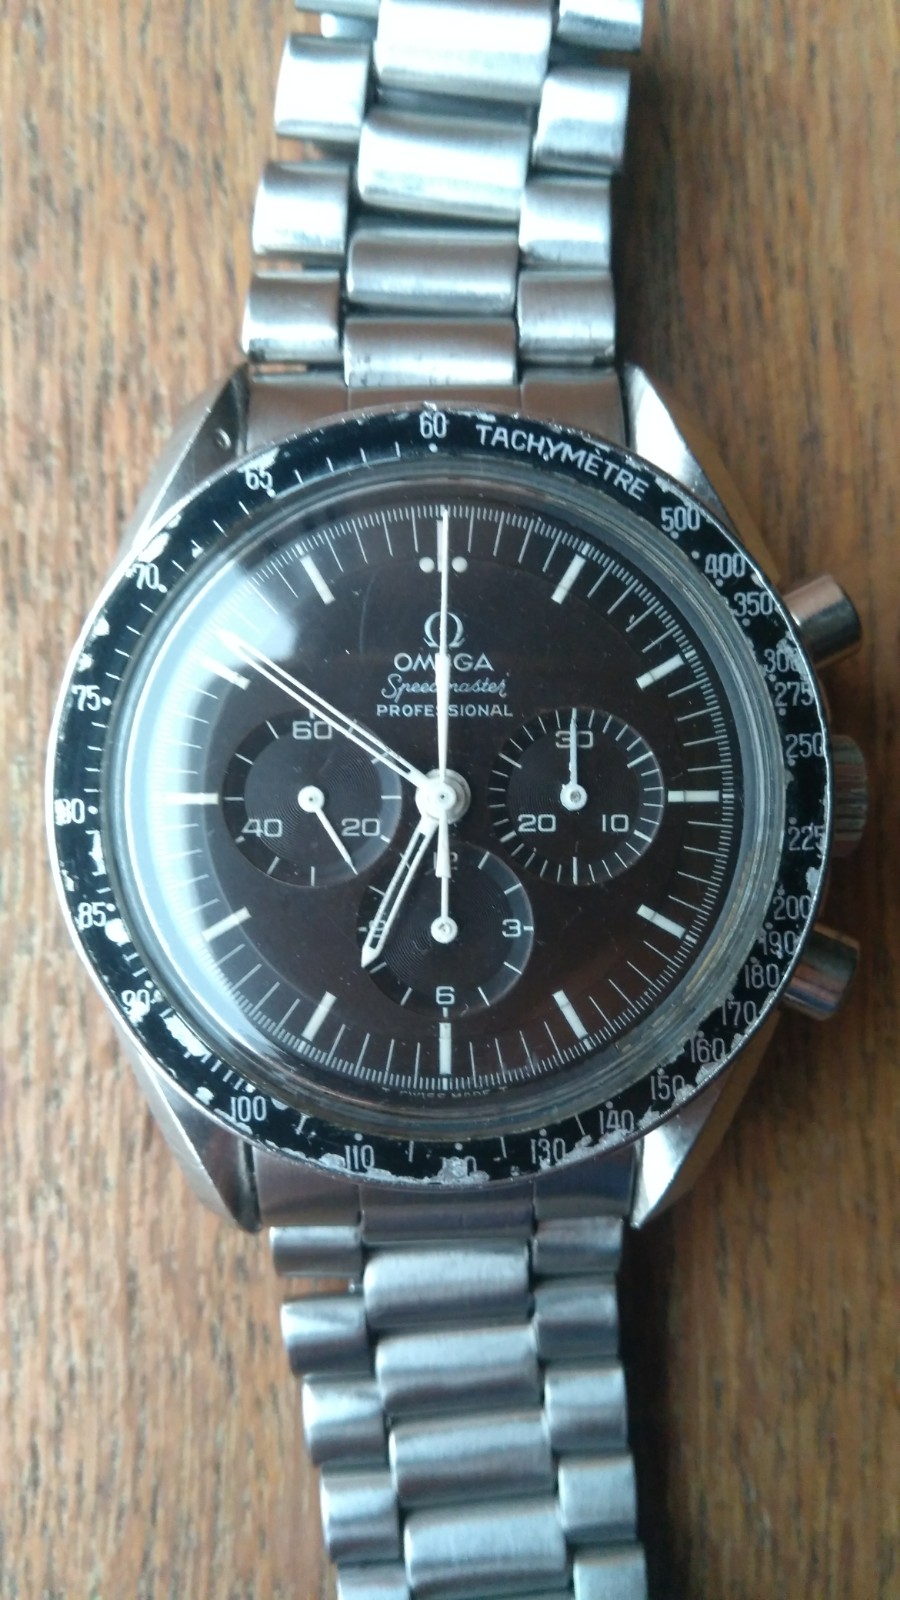 Speedmaster 145.022 from 1970 - DON and 